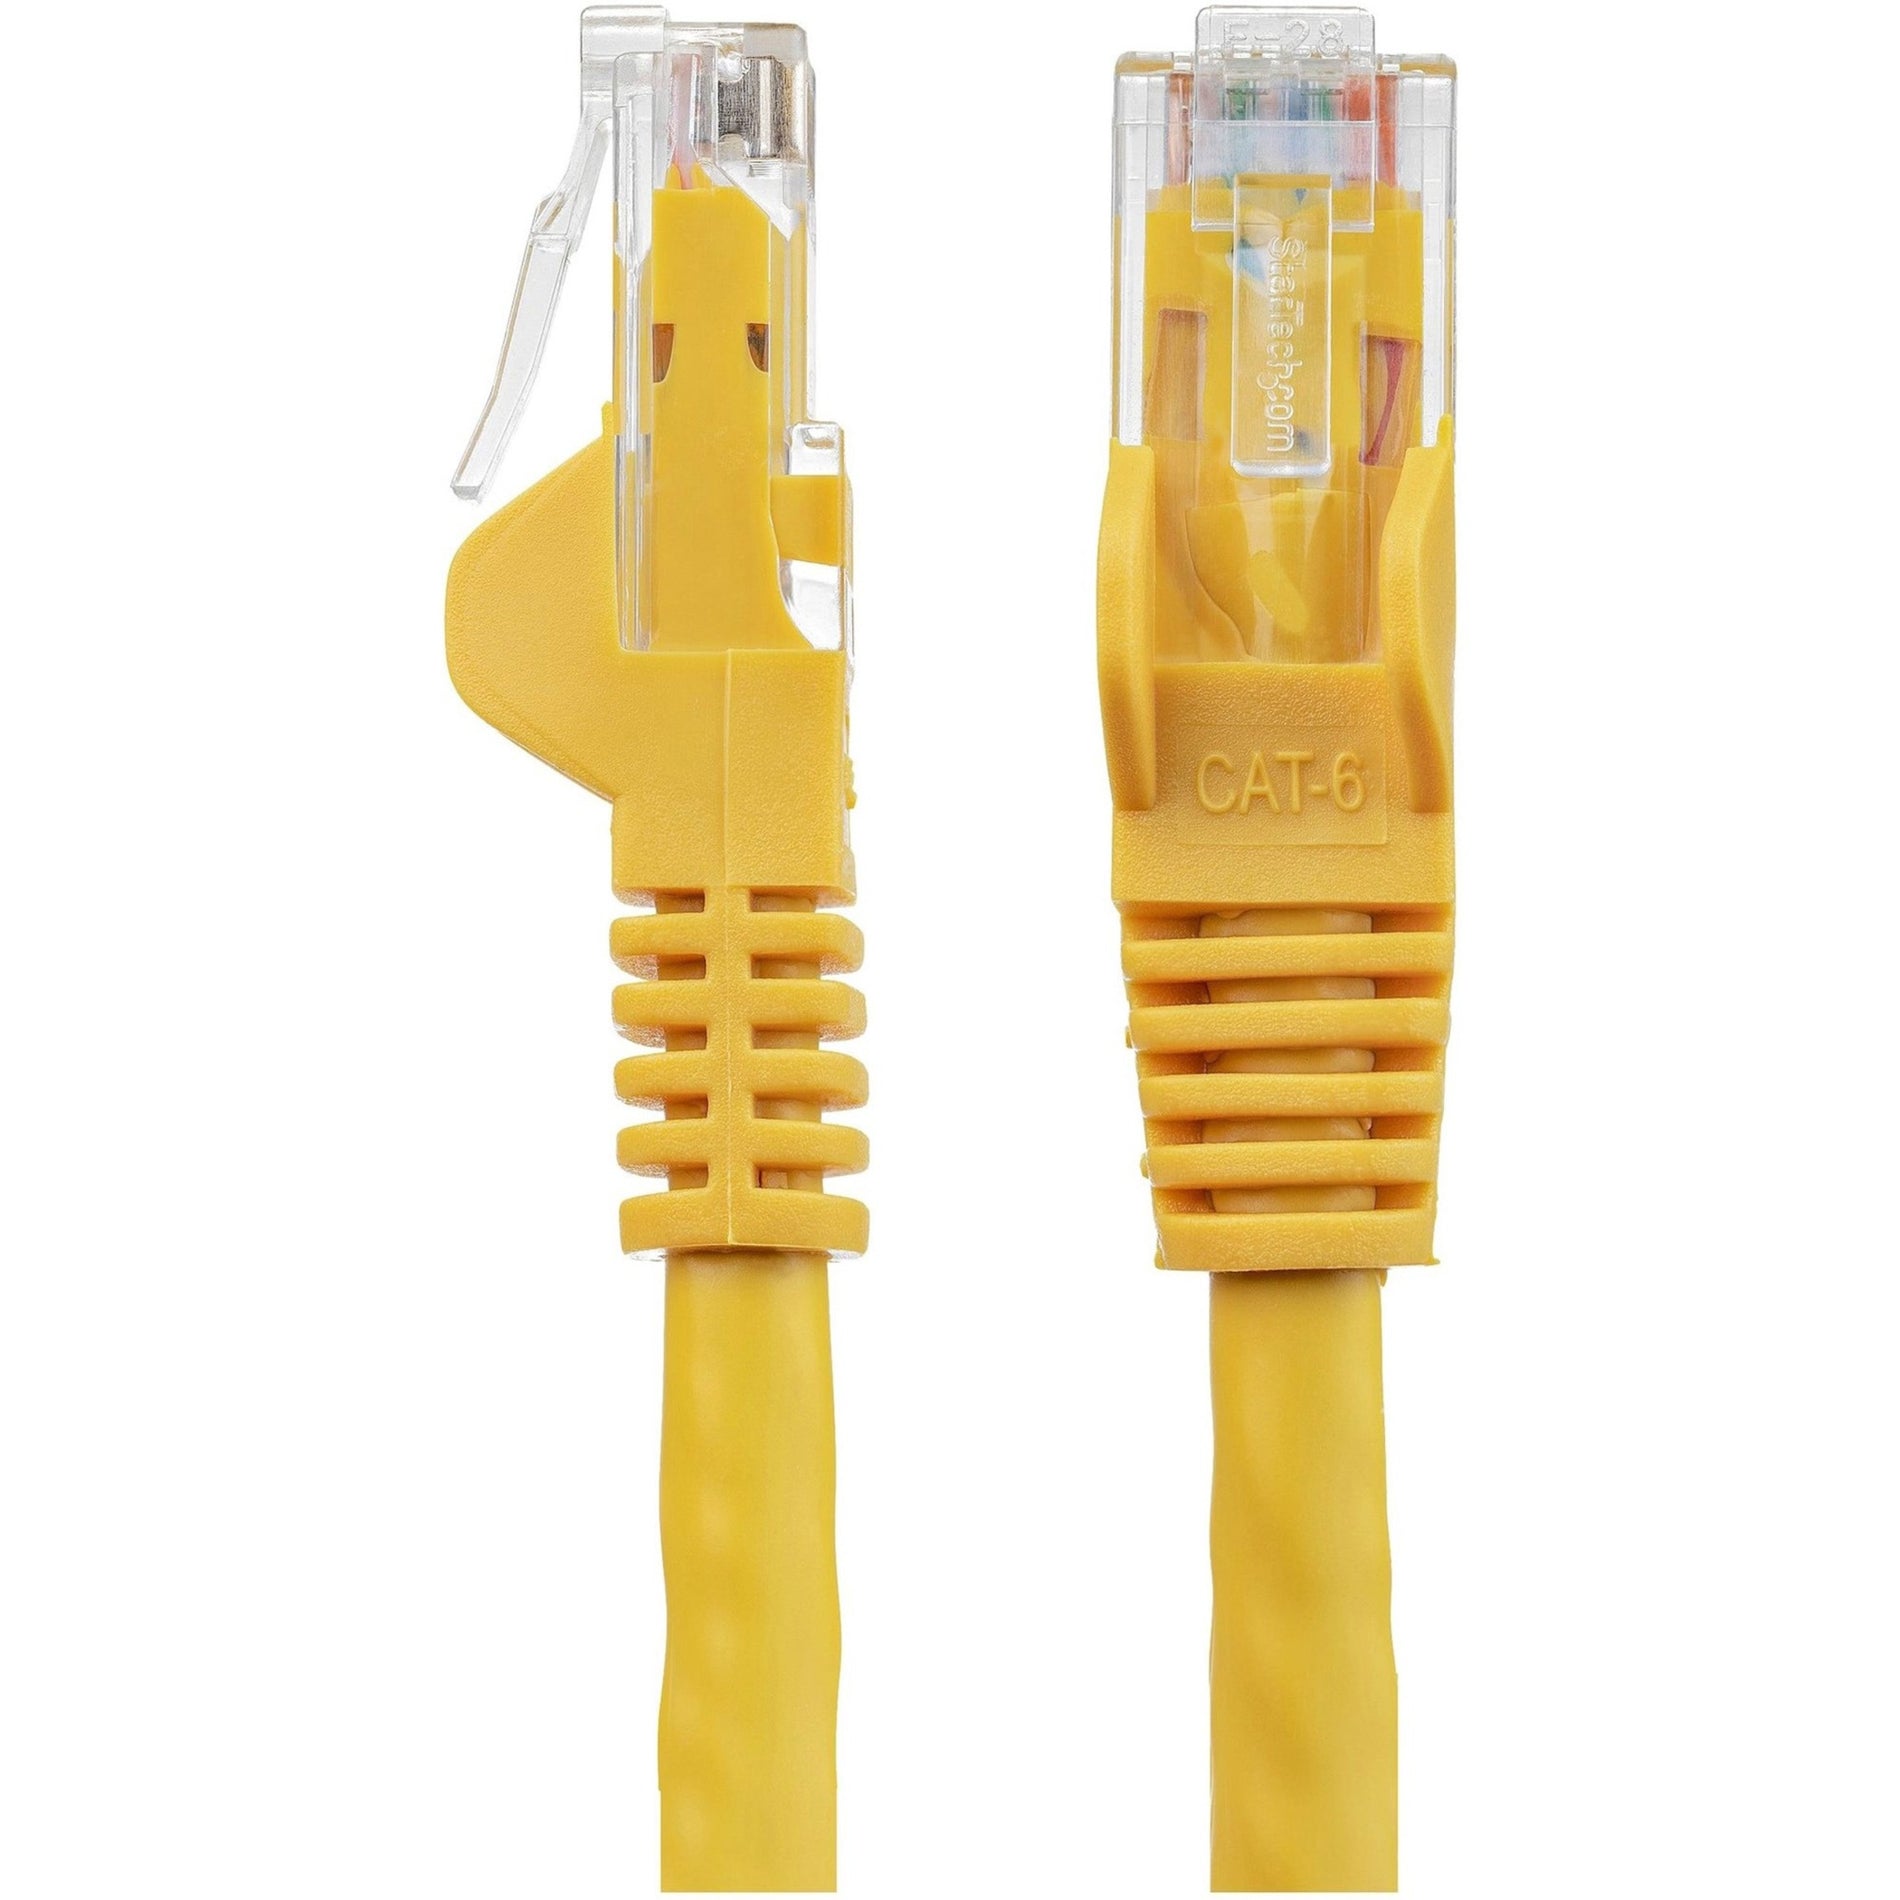 StarTech.com N6PATCH1YL Cat6 Patch Cable, 1ft Yellow Ethernet Cable, Snagless RJ45 Connectors